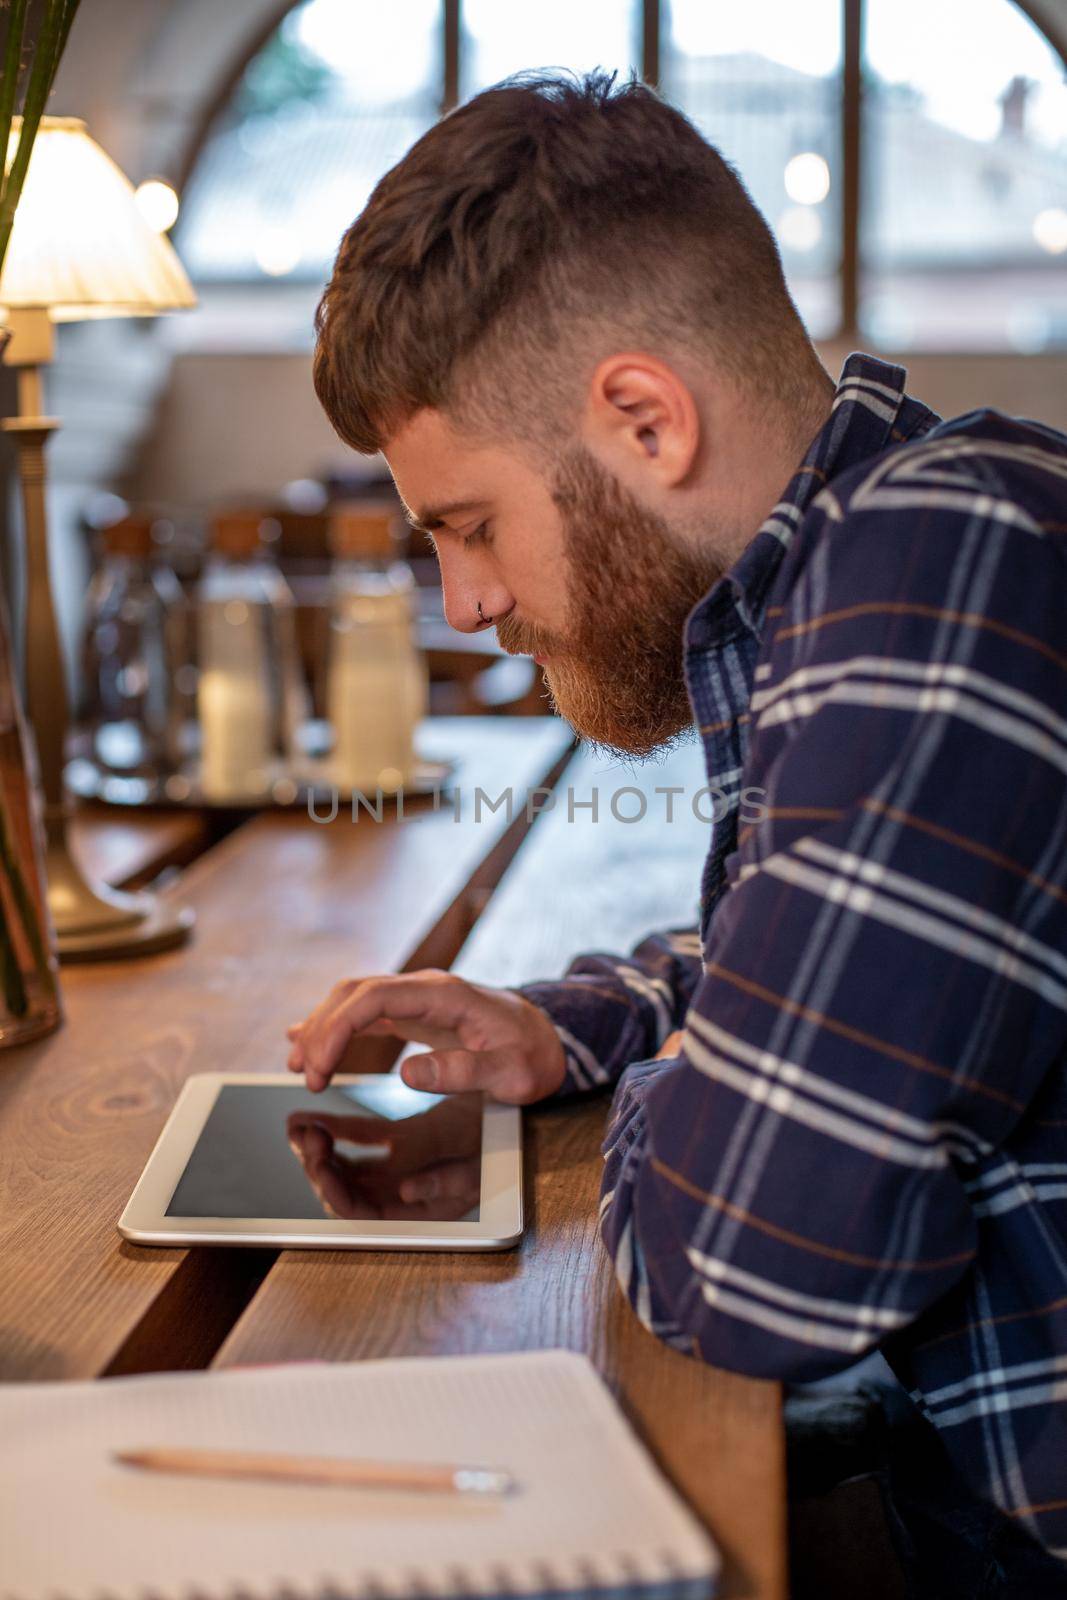 Freelancer dressed in casual outfit focus on reading news and looking on digital tablet while sitting in cozy urban cafe. by nazarovsergey